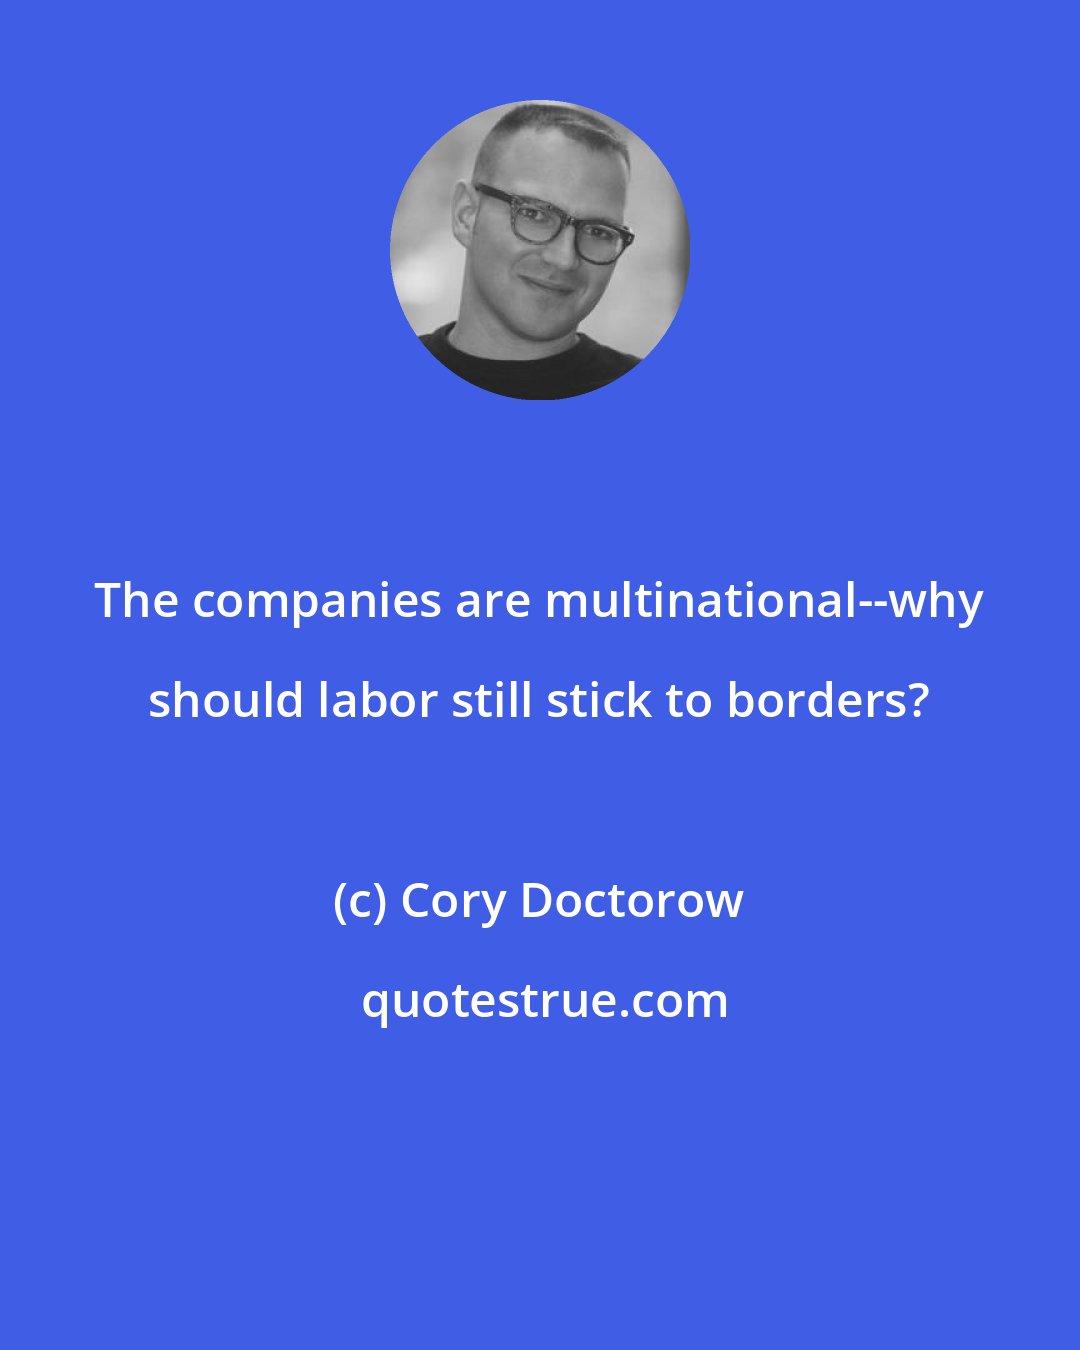 Cory Doctorow: The companies are multinational--why should labor still stick to borders?